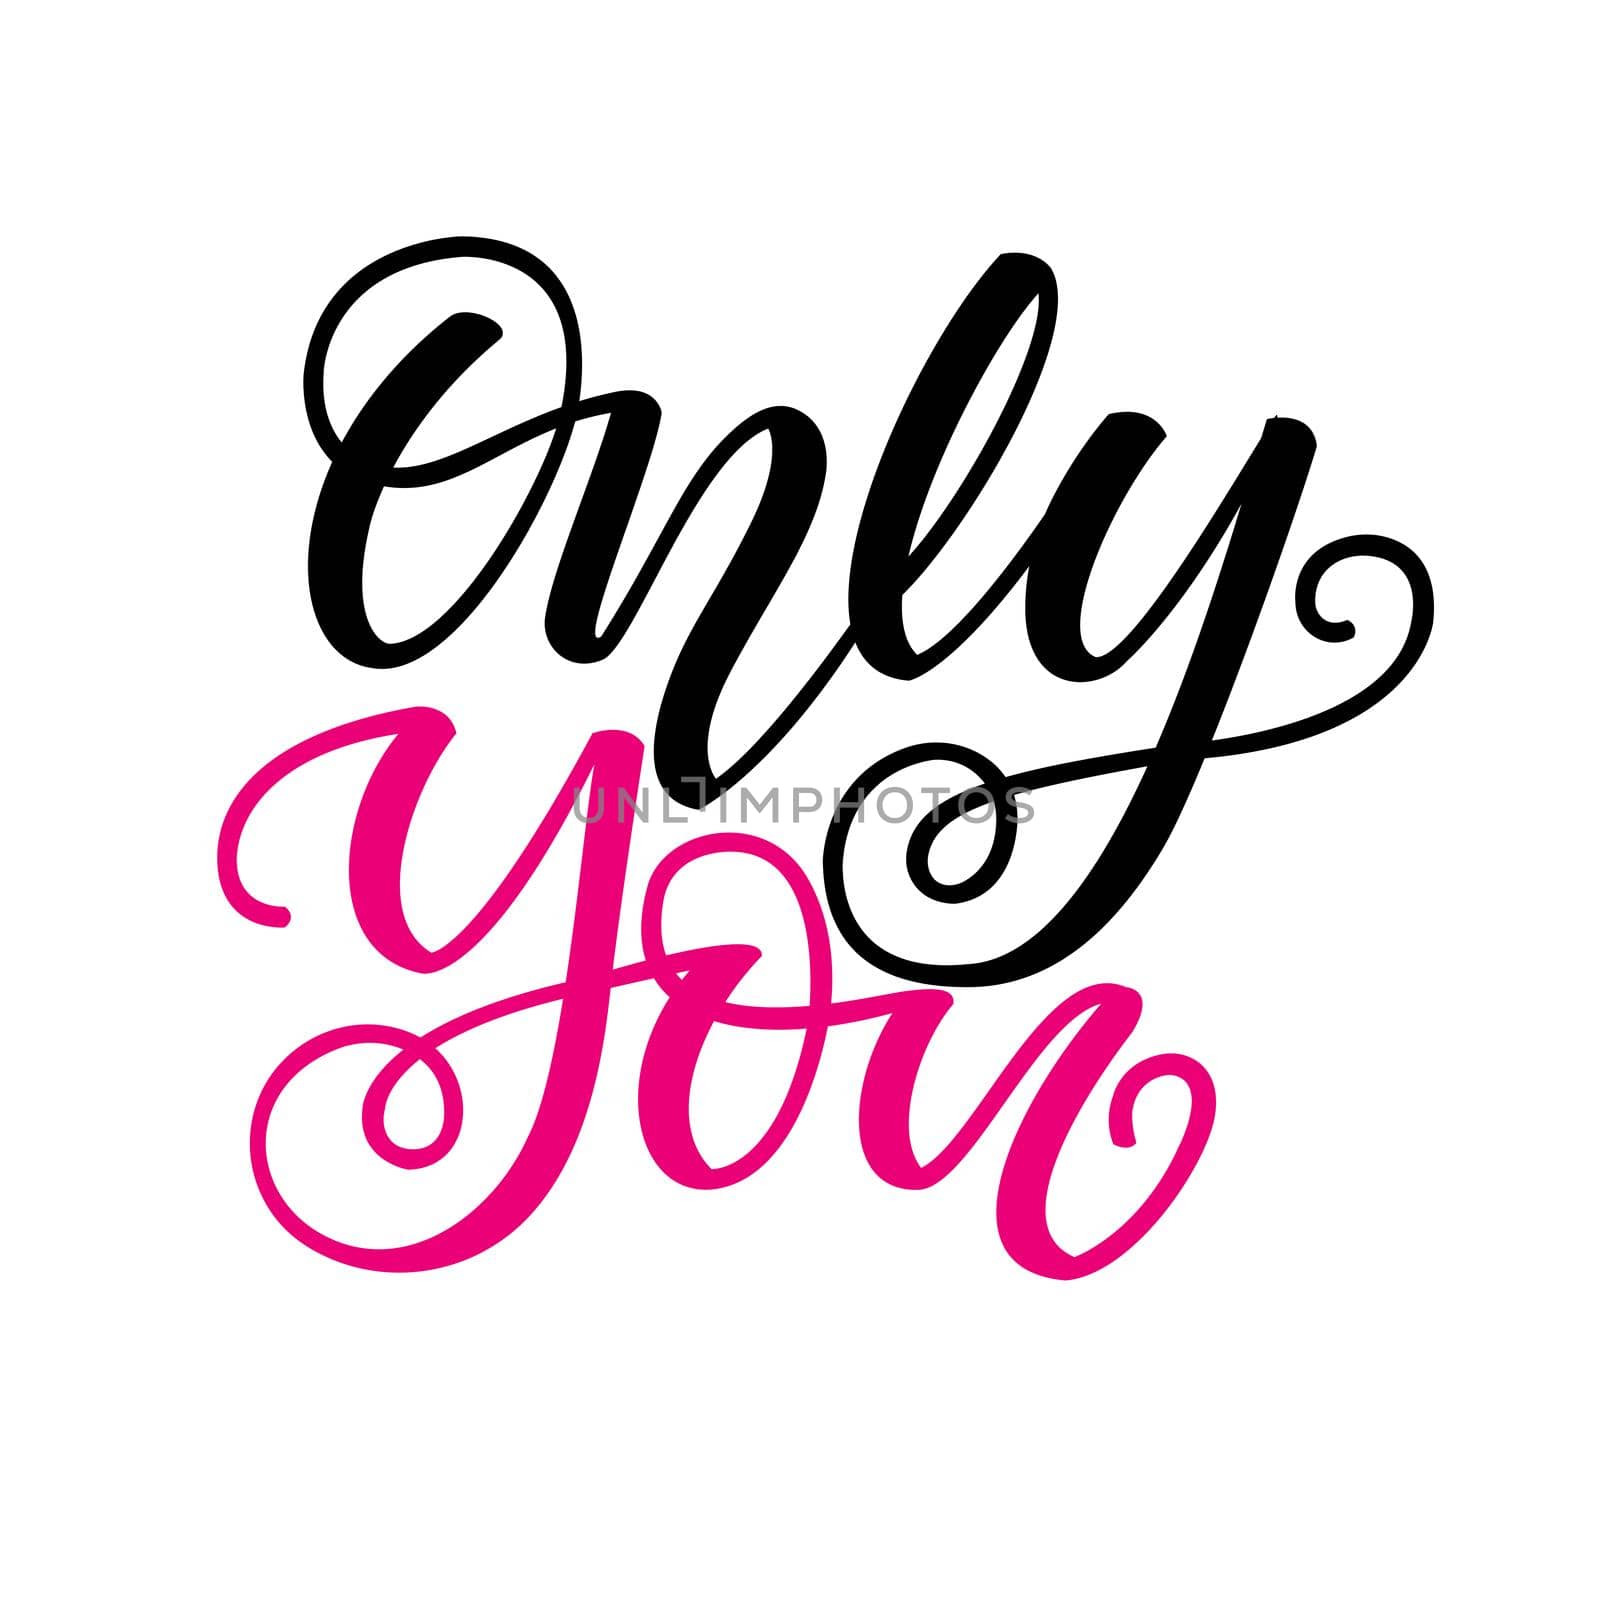 Only you. Inspirational romantic lettering isolated on white background. Positive quote. illustration for Valentines day greeting cards, posters, print on T-shirts and much more.